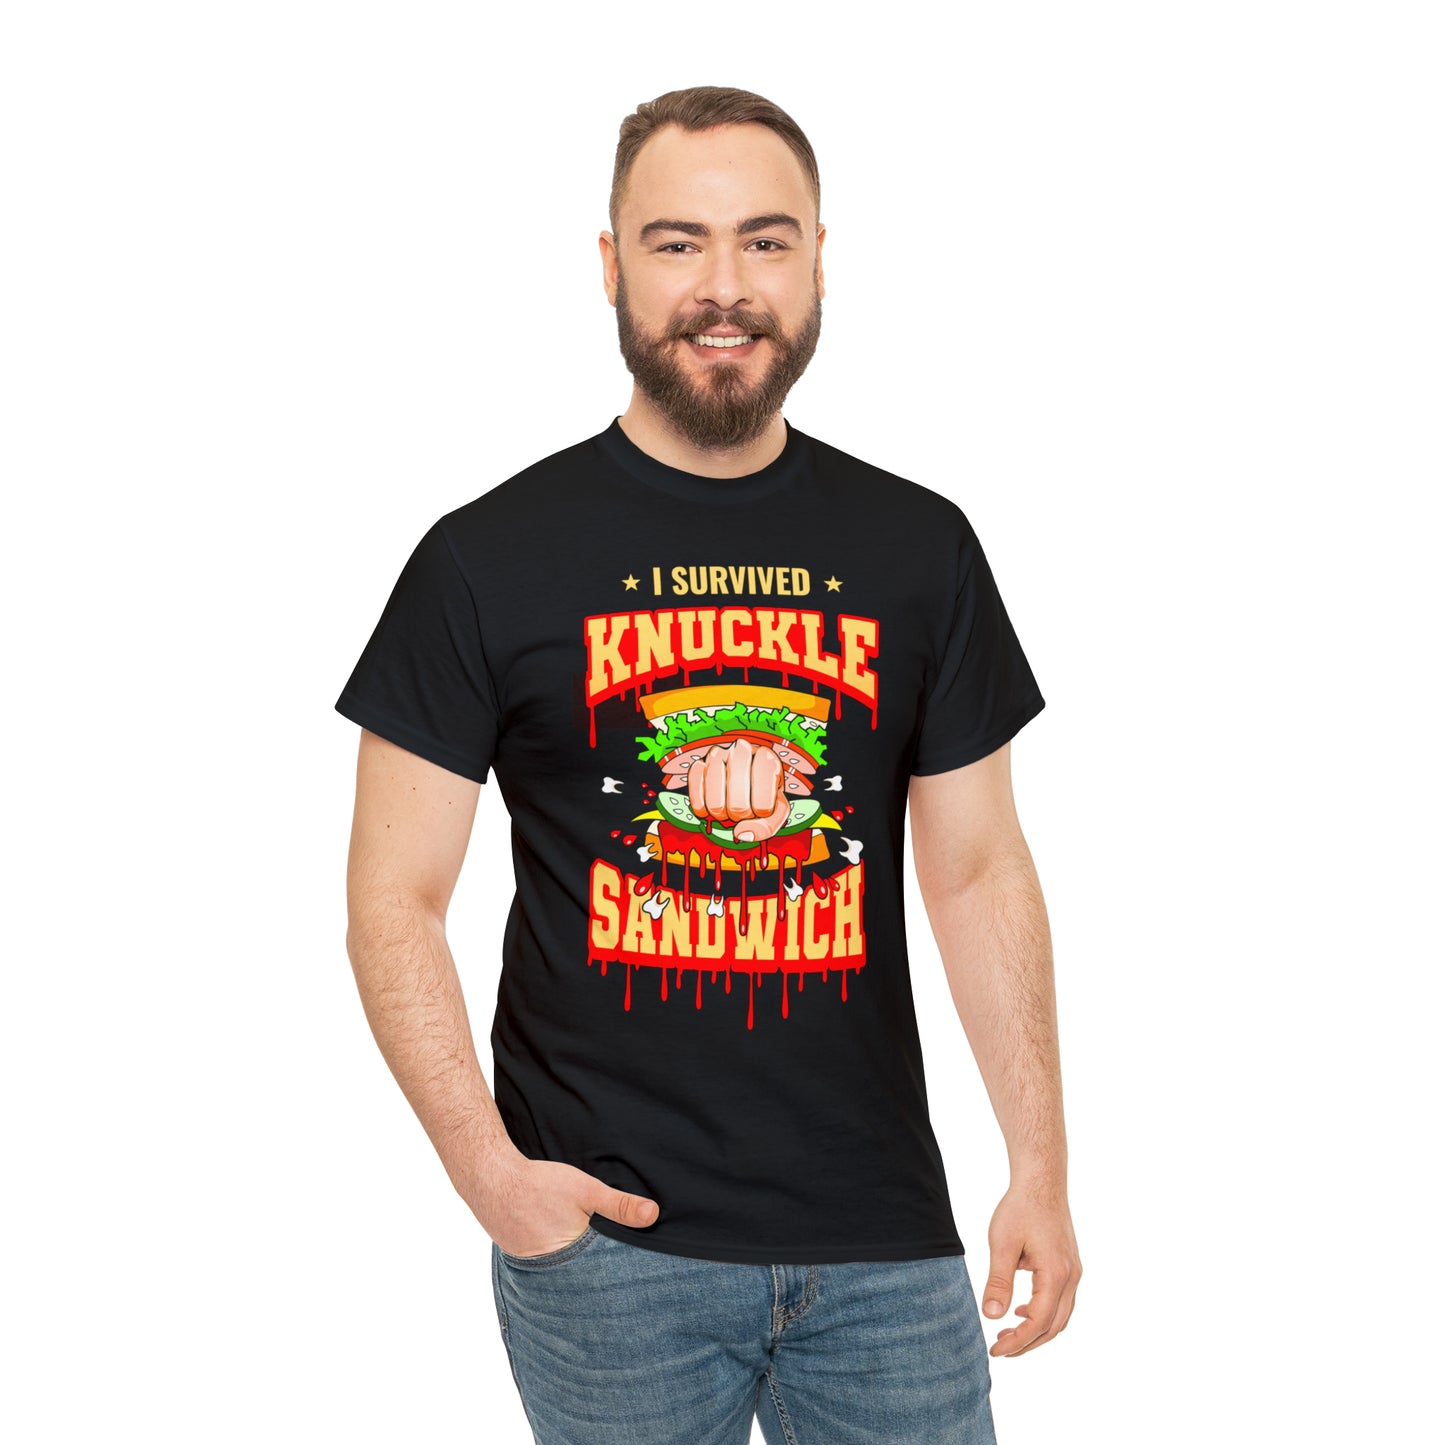 I Survived the Knuckle Sandwich T-Shirt!